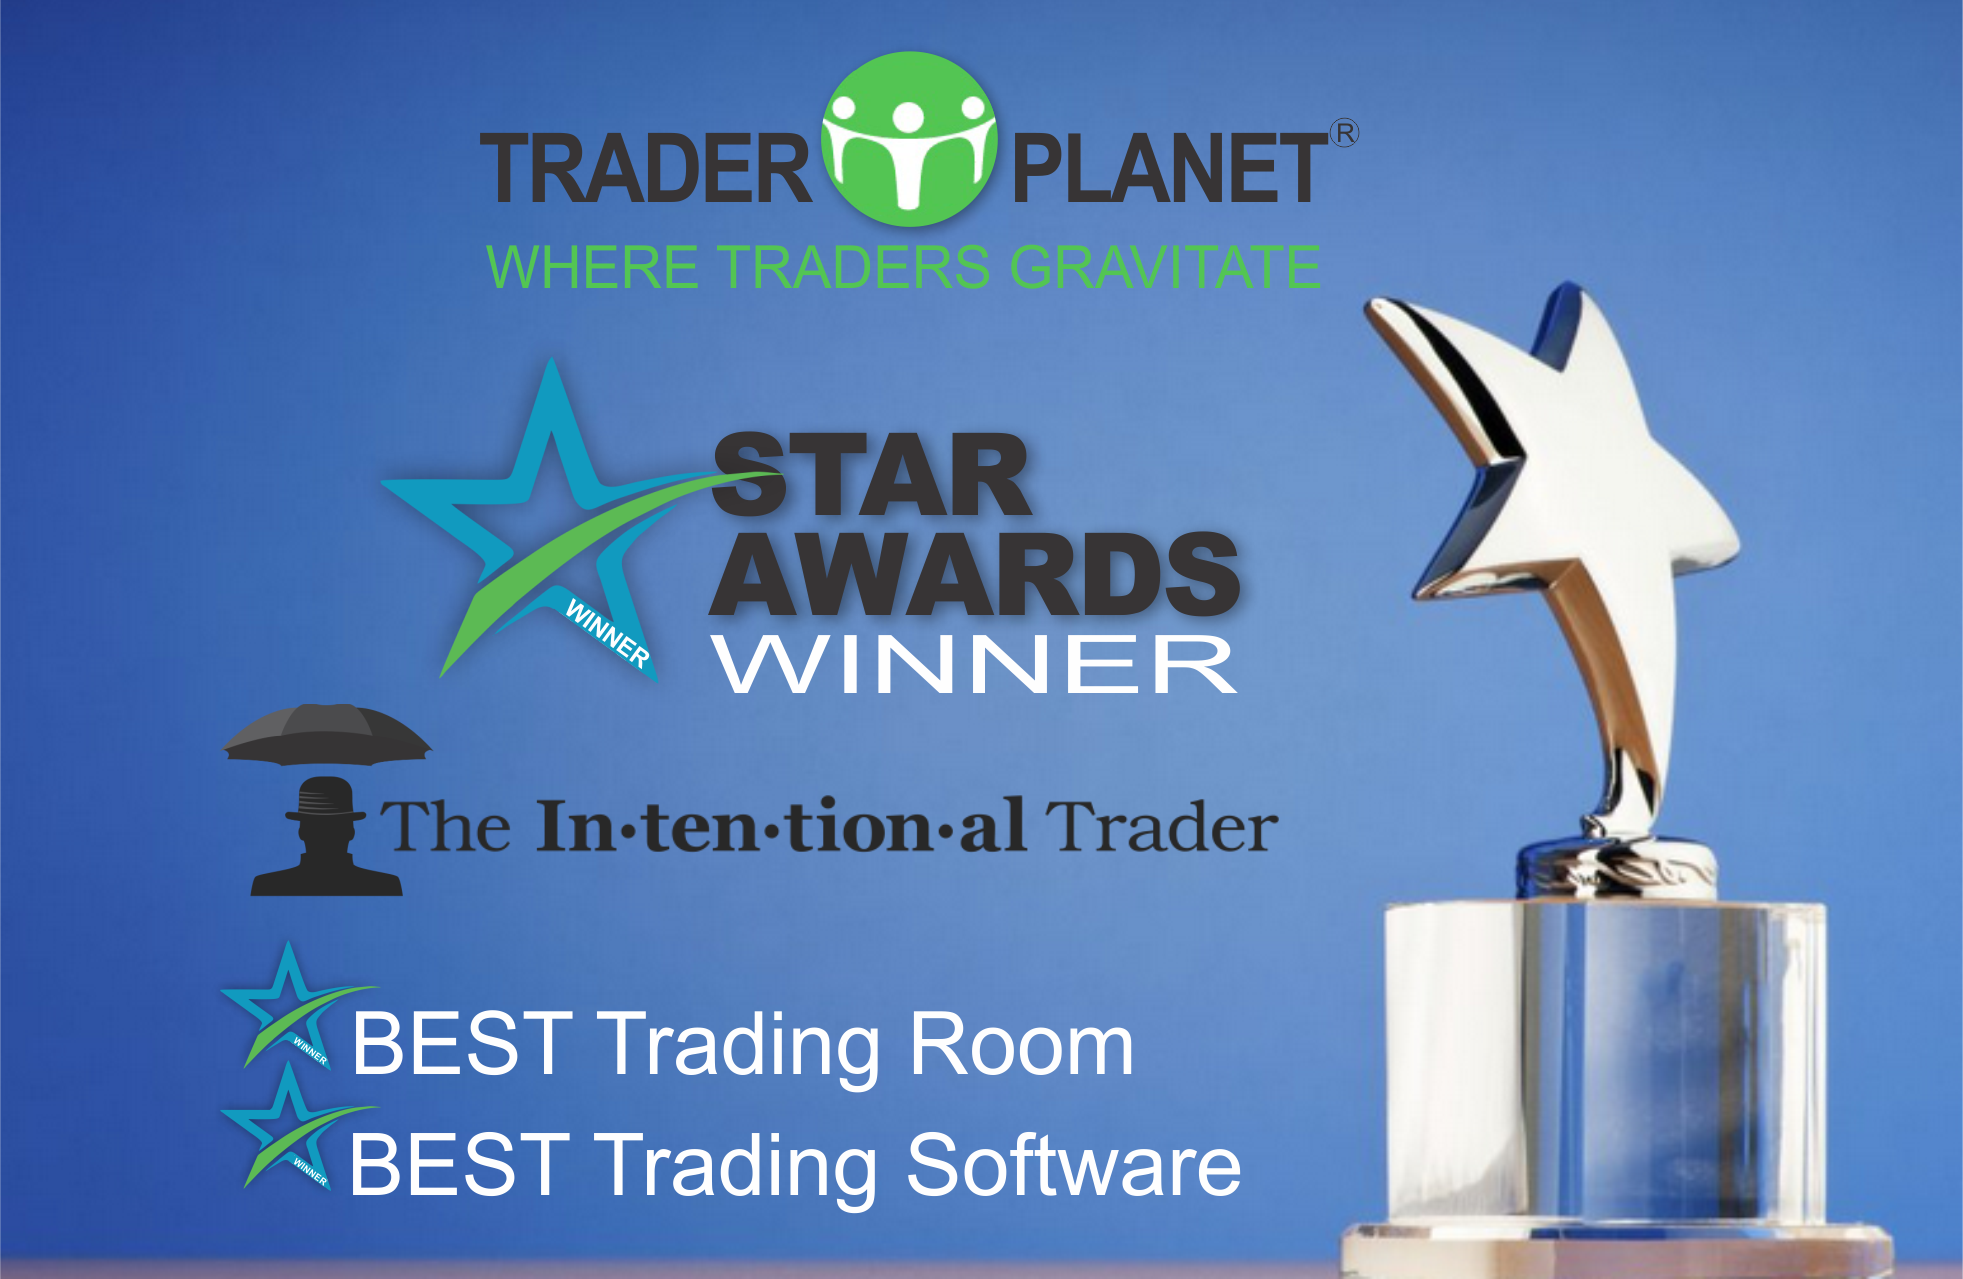 //www.theintentionaltrader.com/wp-content/uploads/Star-Awards.png